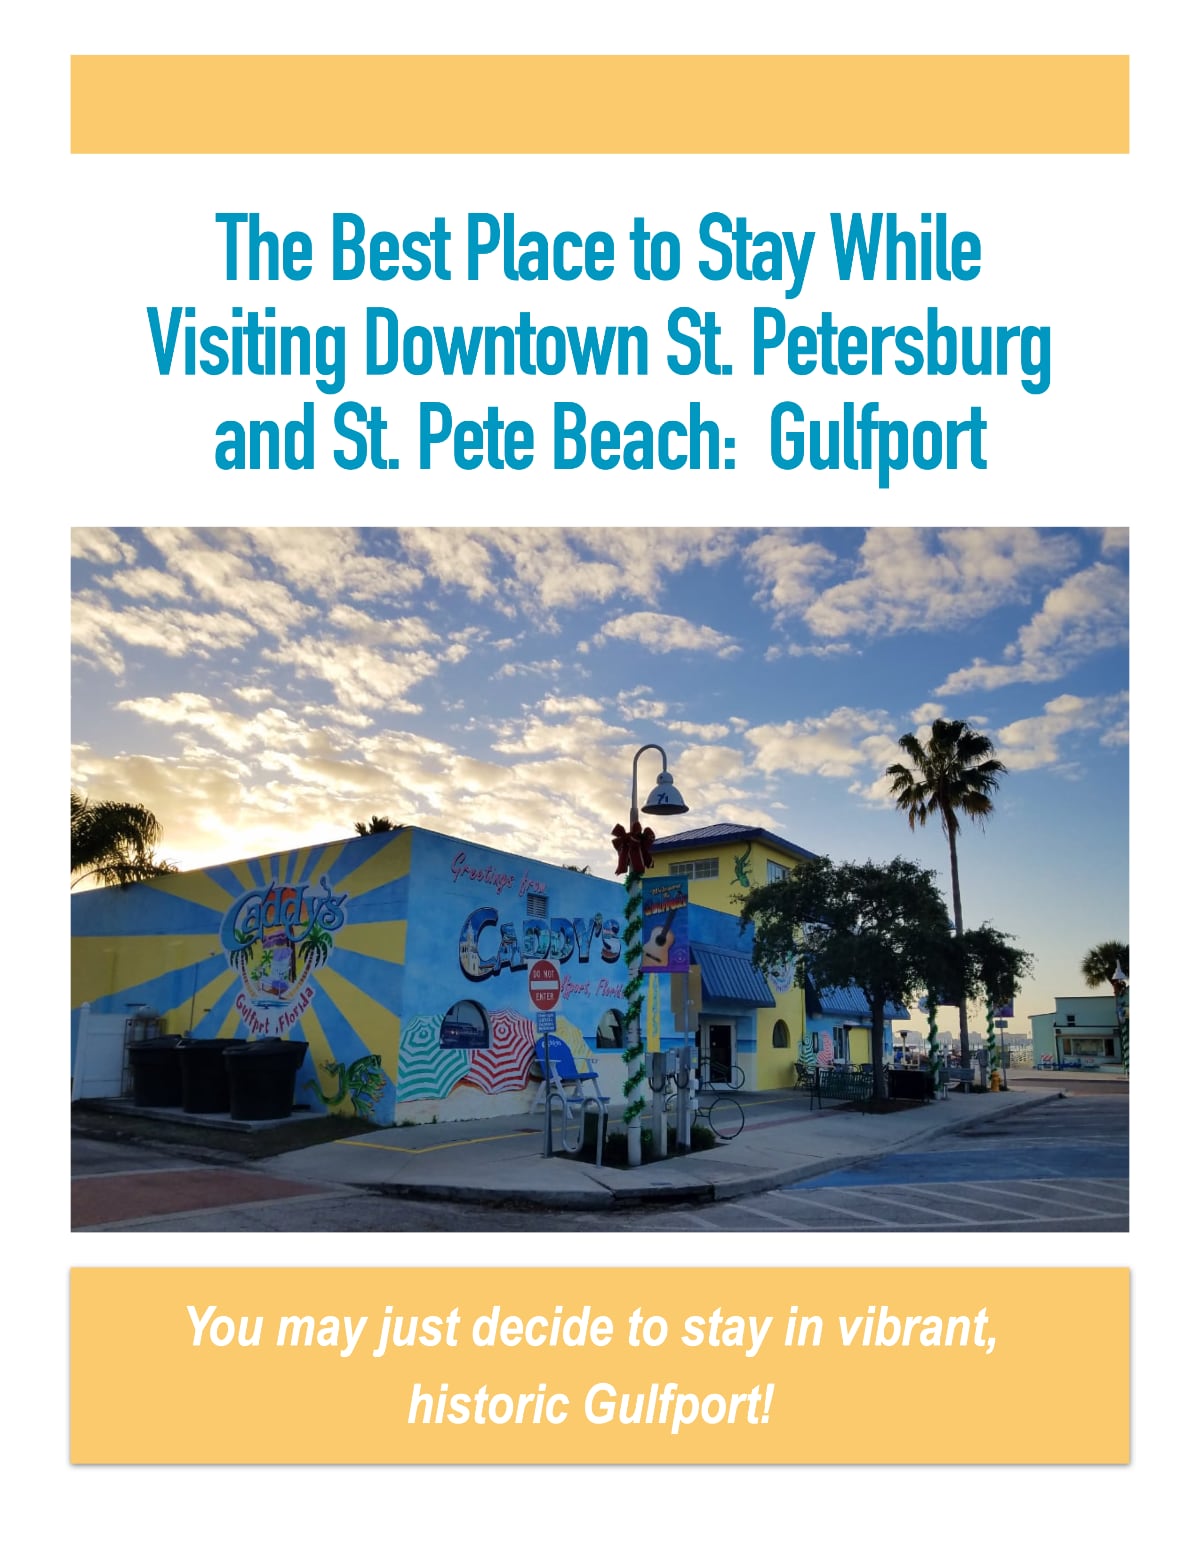 A graphic titled The Best Place to Stay While Visiting Downtown St. Petersburg and St. Pete Beach: Gulfport, along with a photo, for adding to a Pinterest board